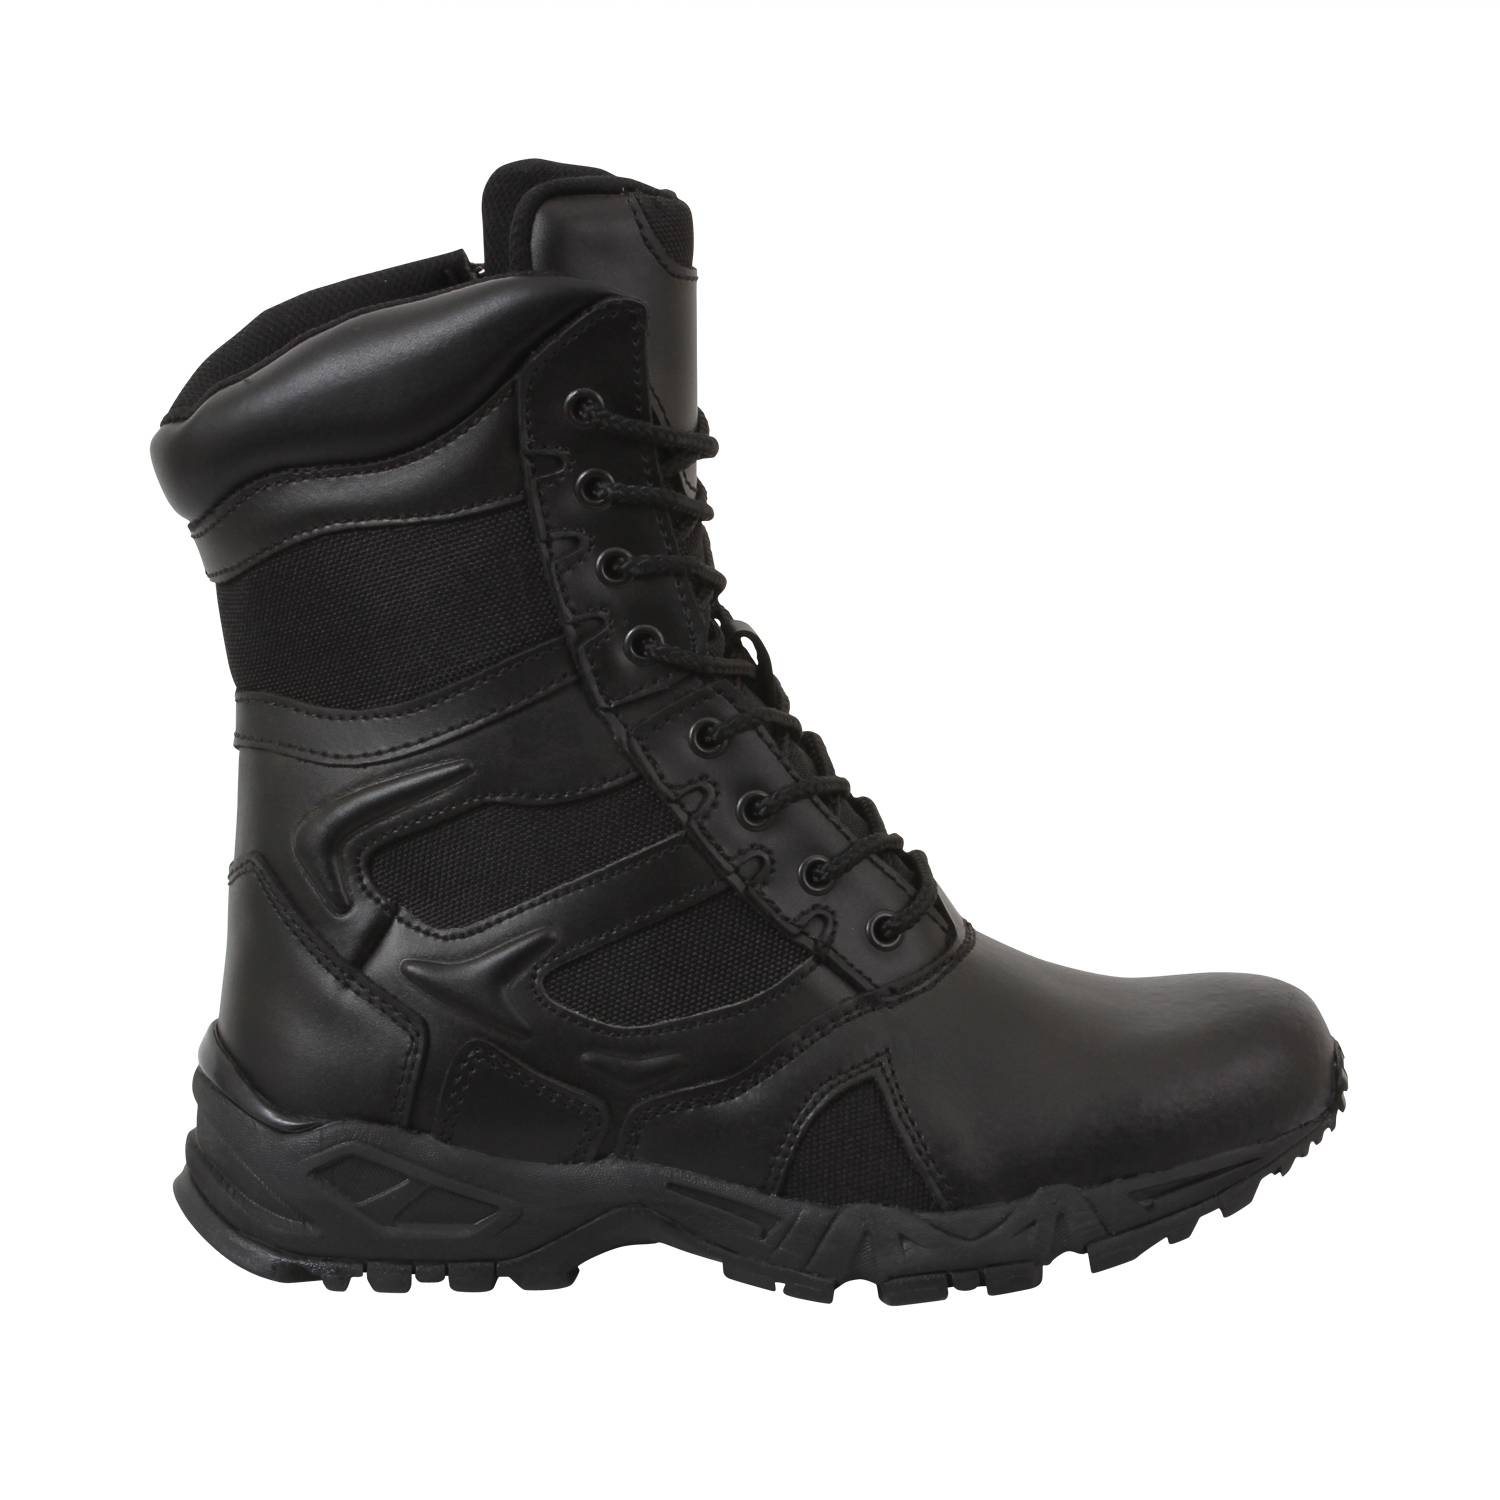 ROTHCO FORCED ENTRY DEPLOYMENT SIDE ZIPPER 8 INCH BOOTS